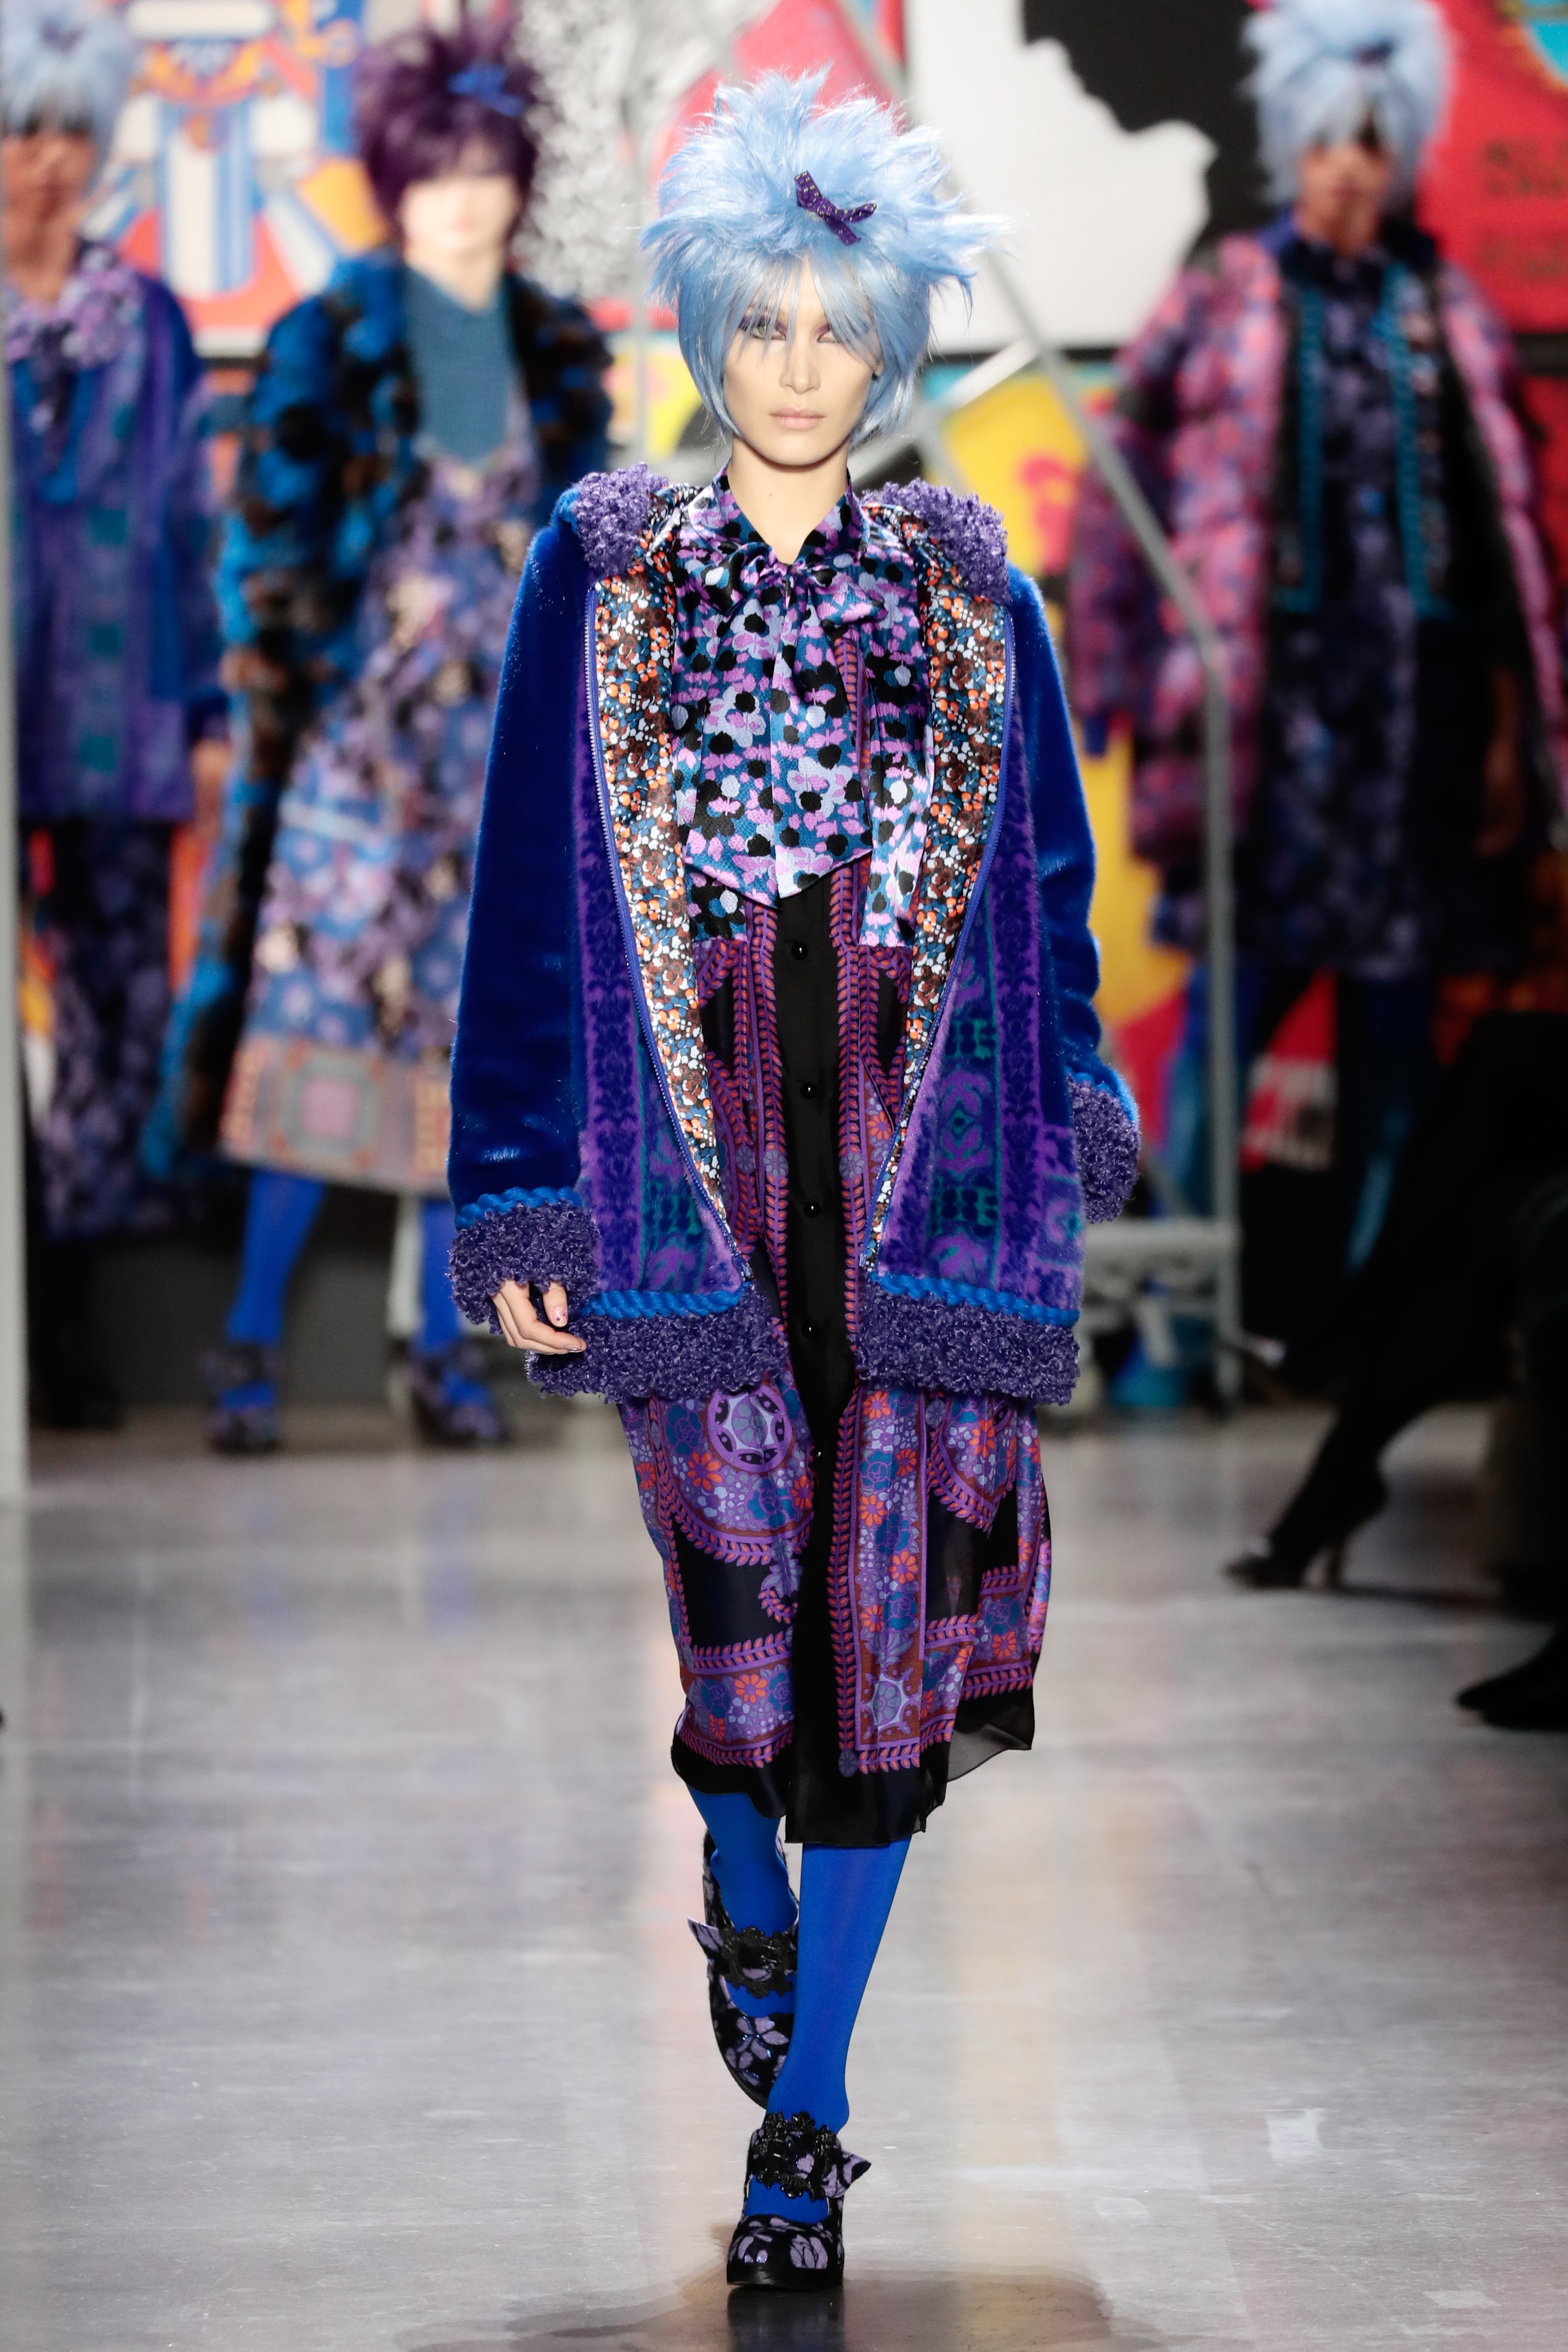 Anna Sui Fall 2019 is a Psychedelic Dream - V Magazine